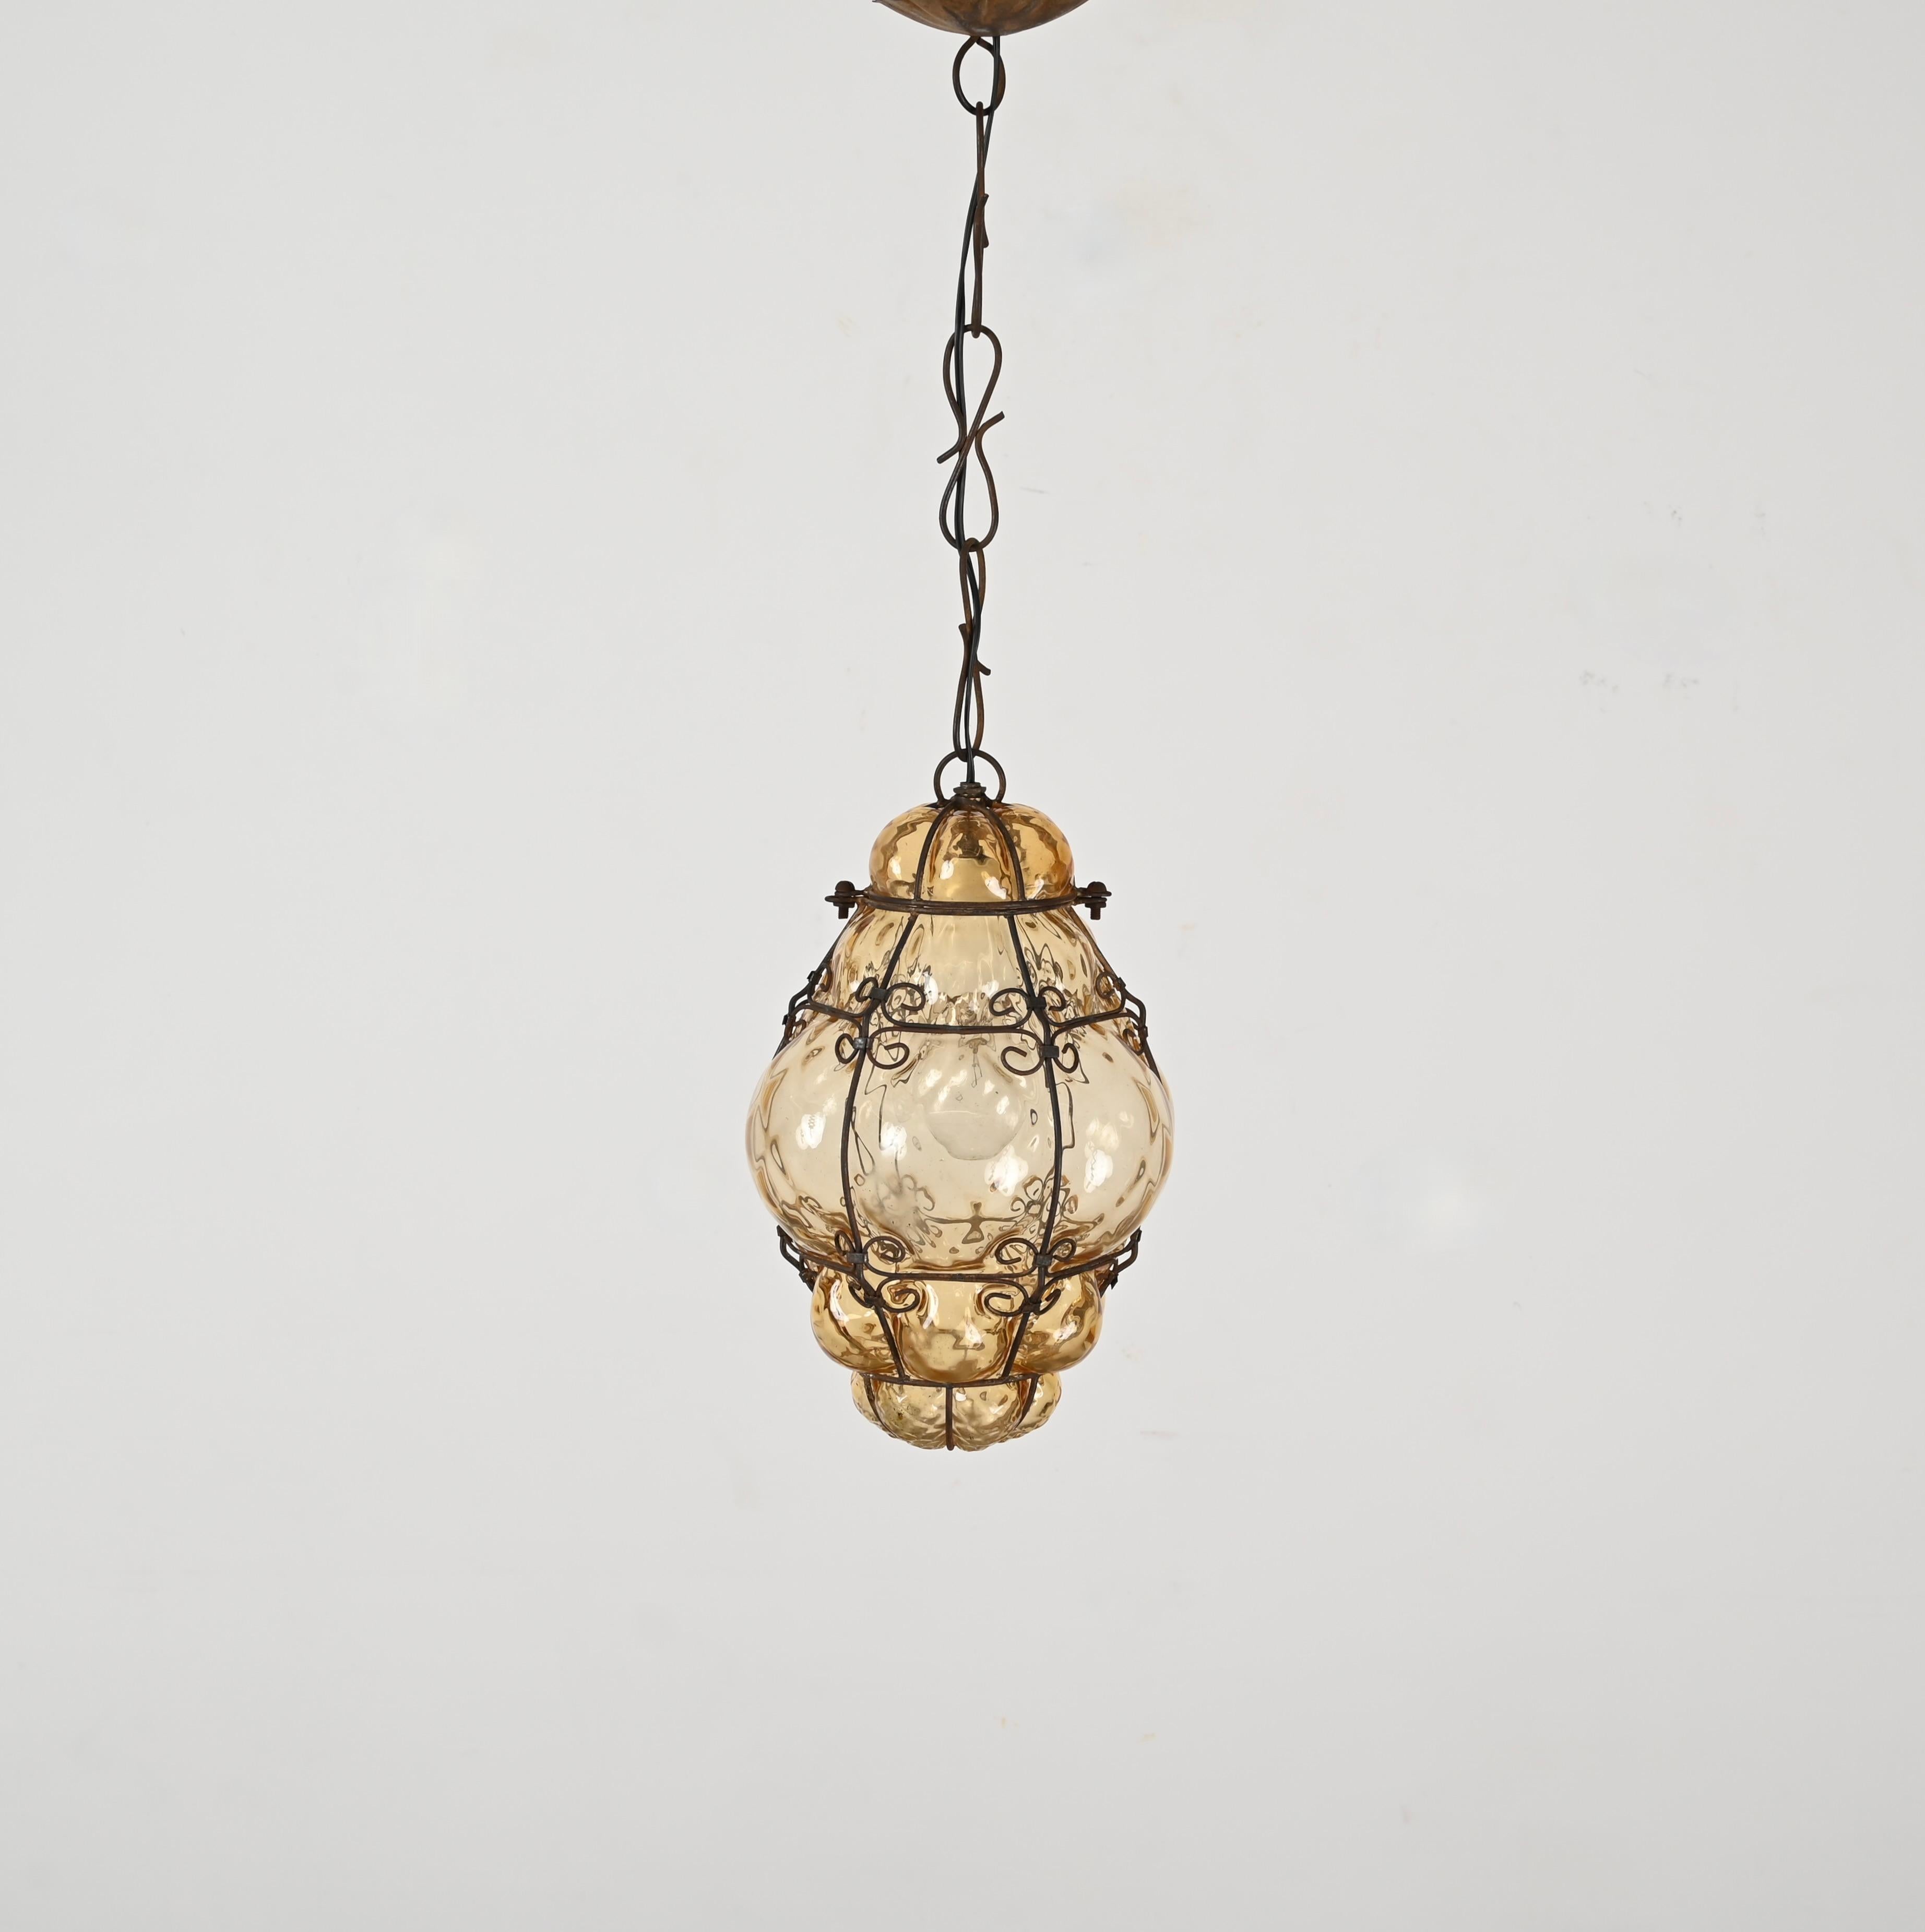 Hand-Crafted Venetian Murano Mouthblown Amber Glass Chandelier with Iron Frame, Italy 1940s For Sale